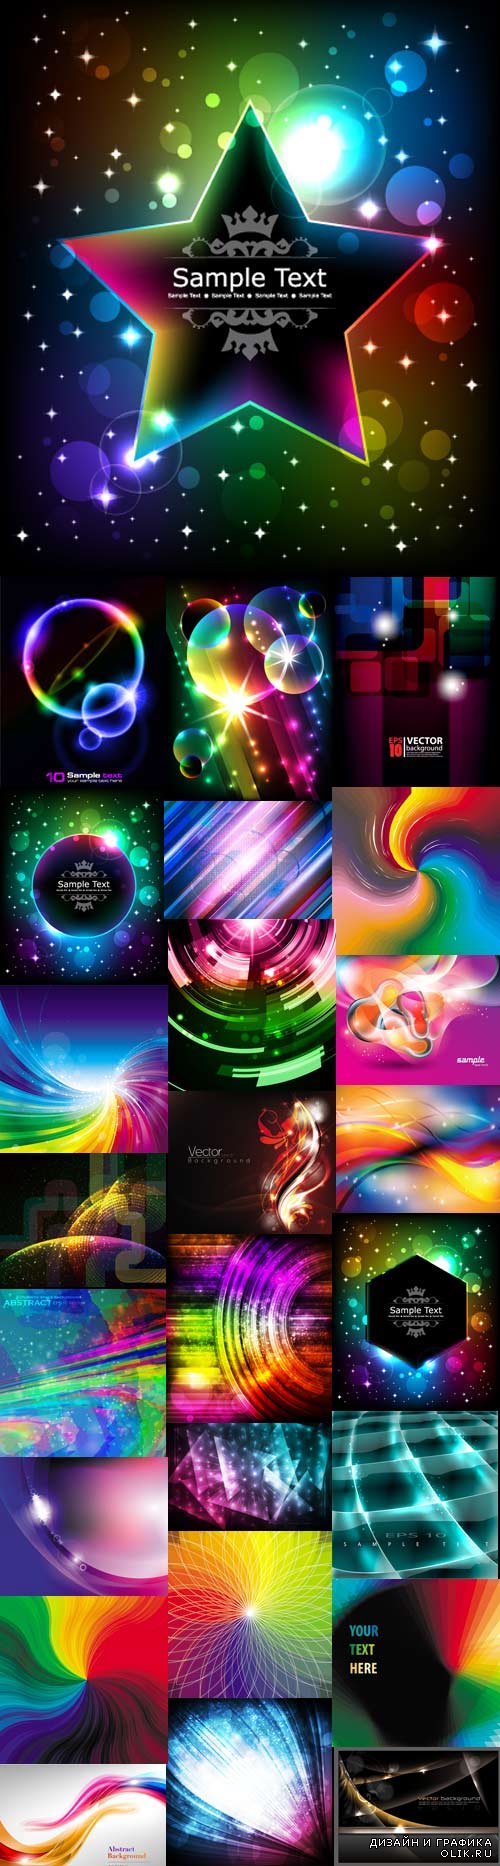 Bright colorful abstract backgrounds vector